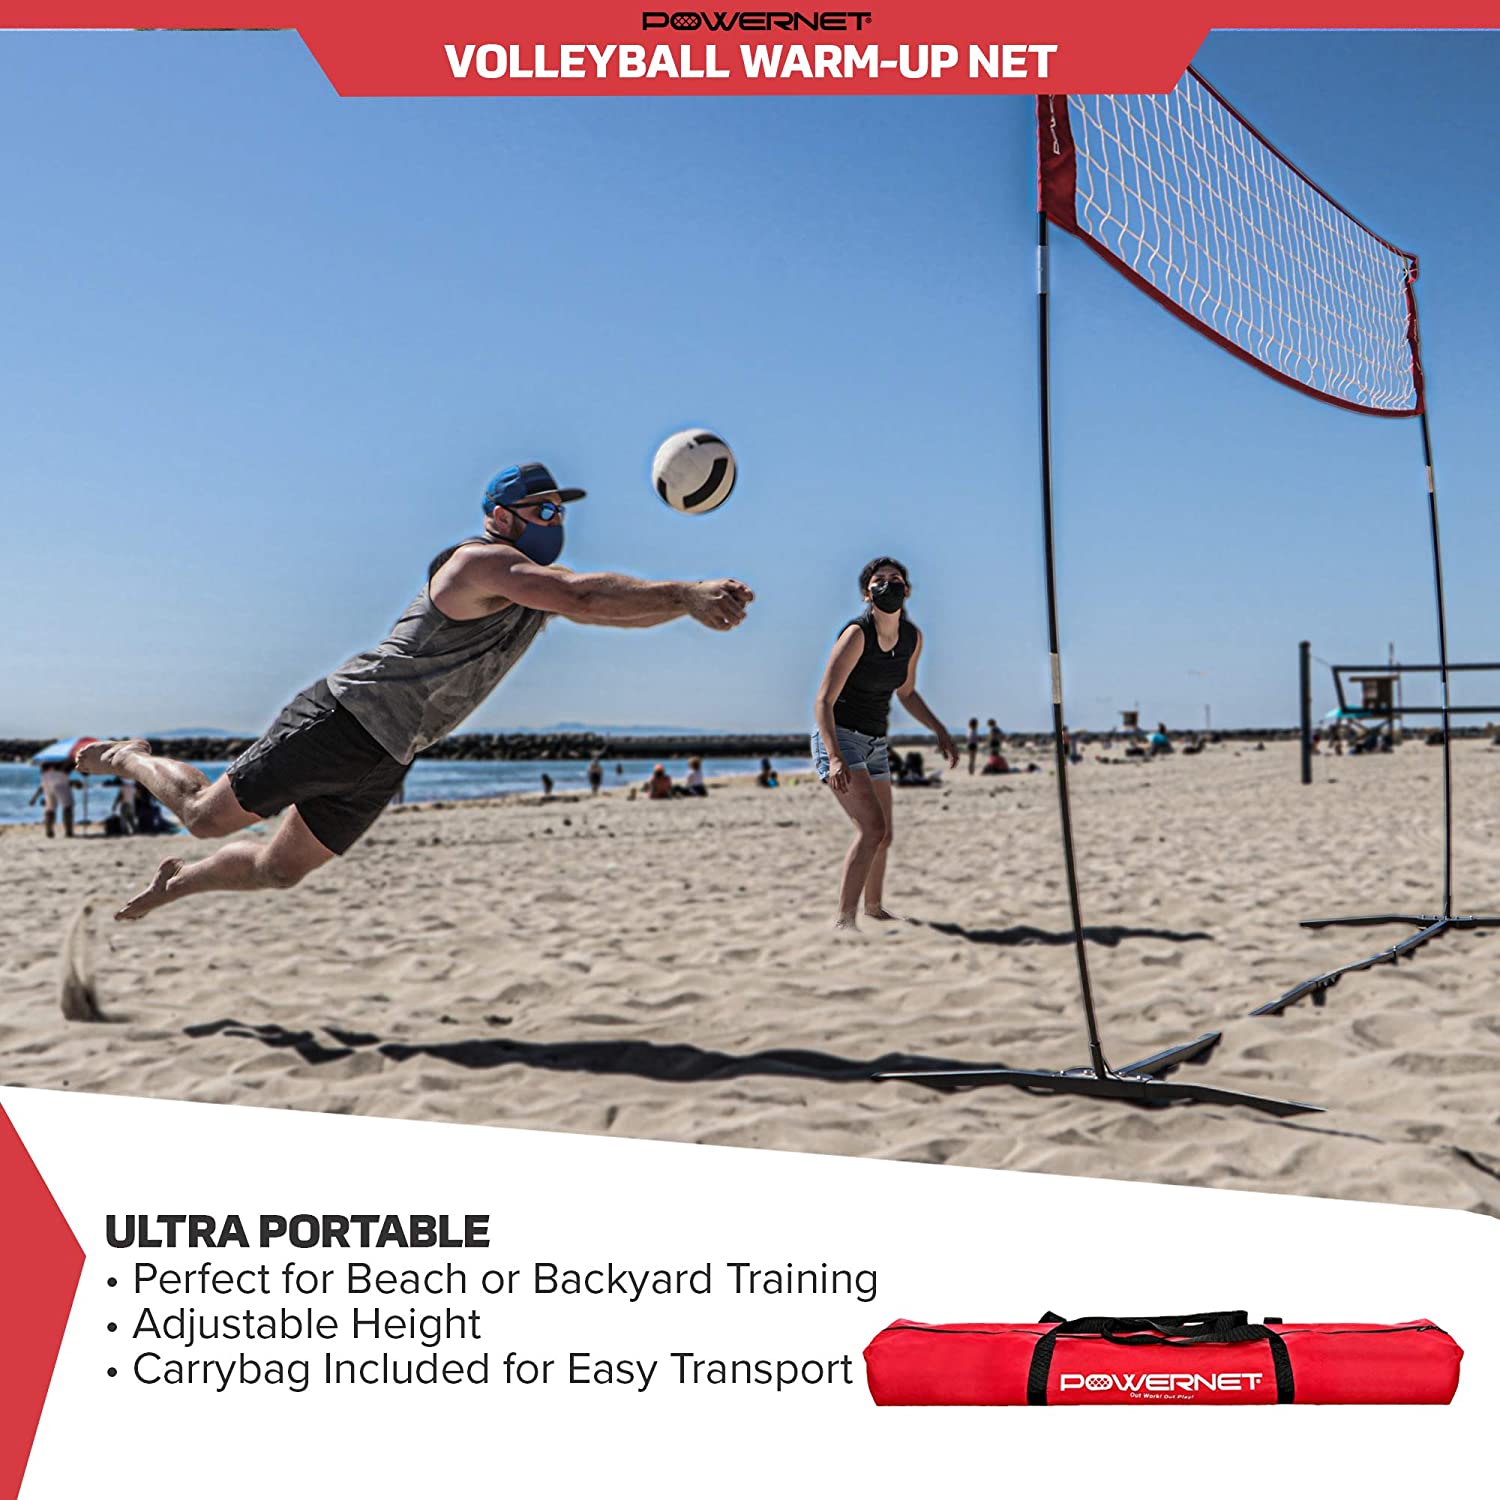 Powernet Volleyball Warm Up Net